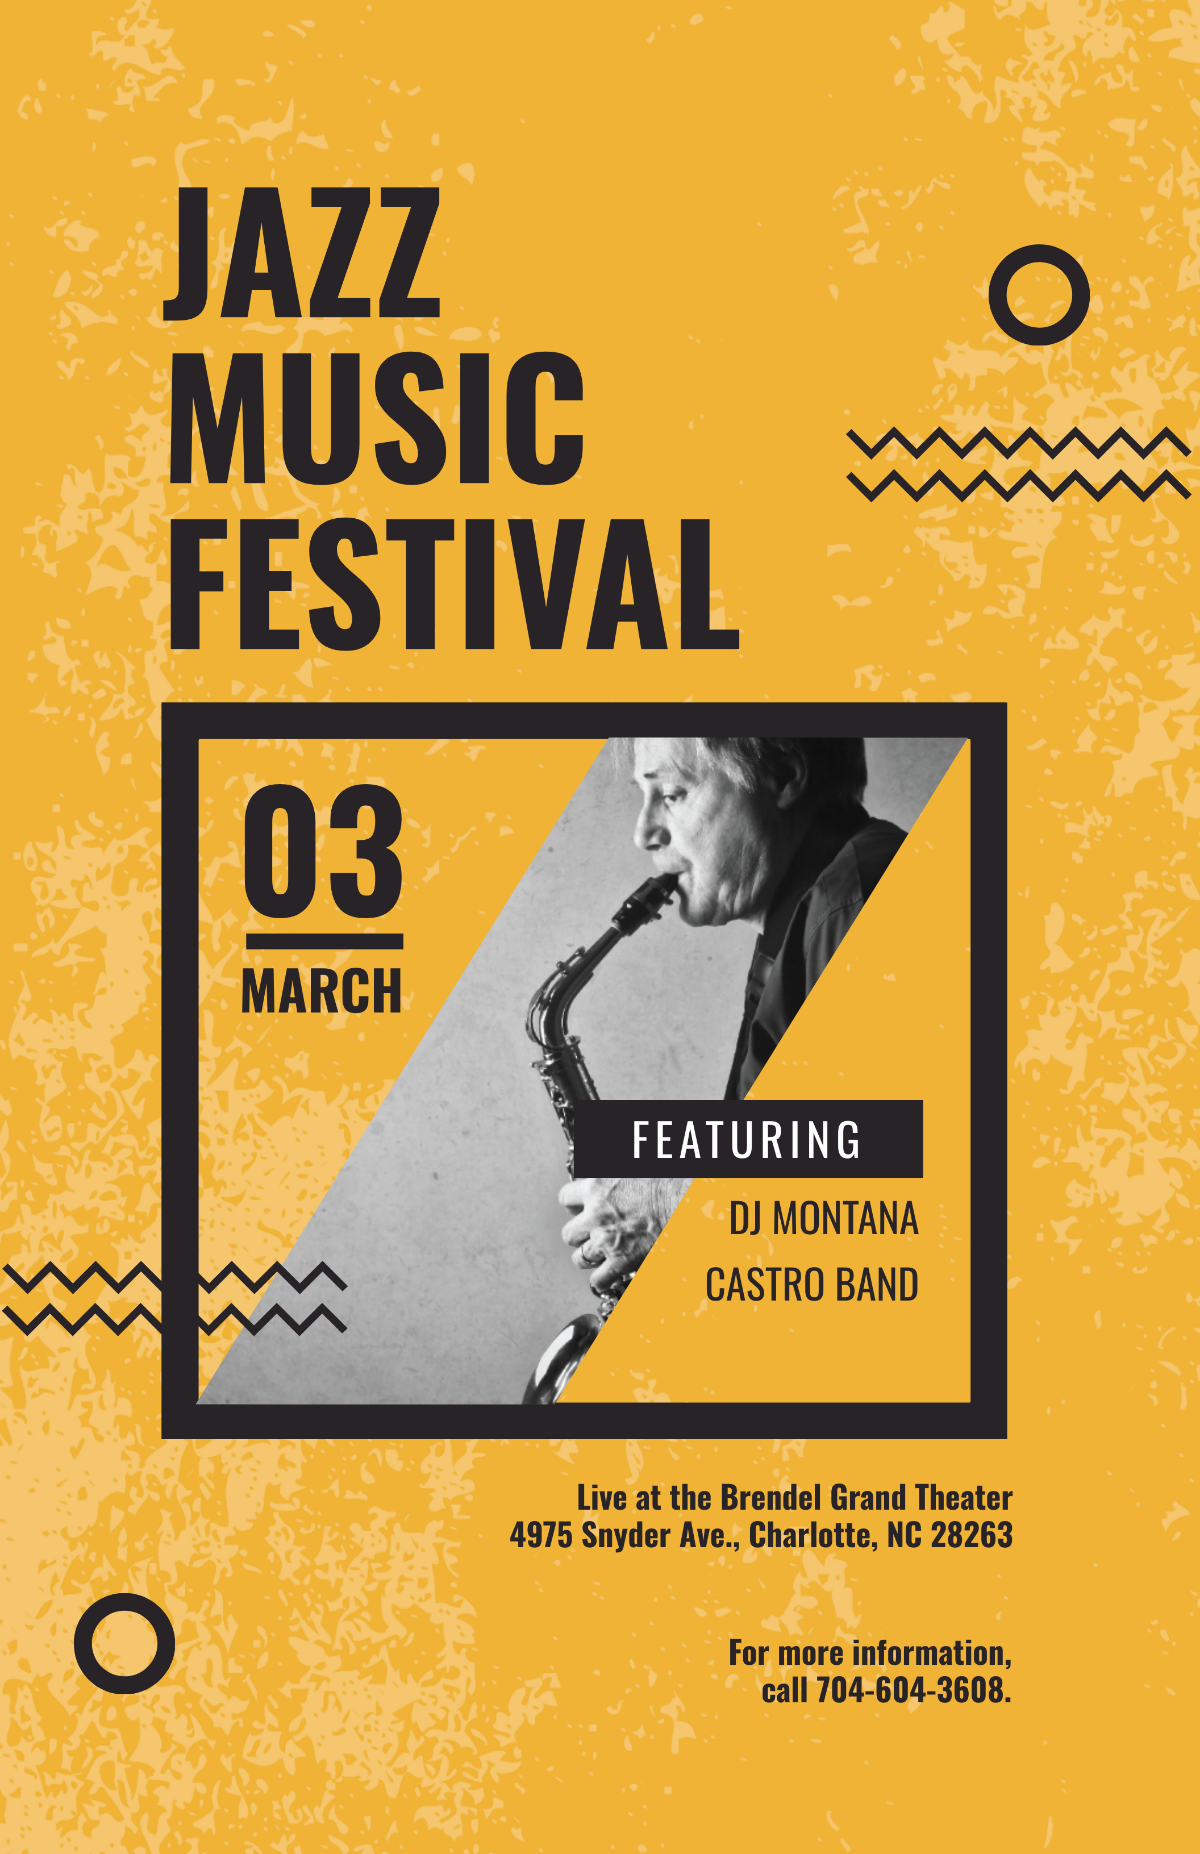 Free Jazz Music Concert Poster Template